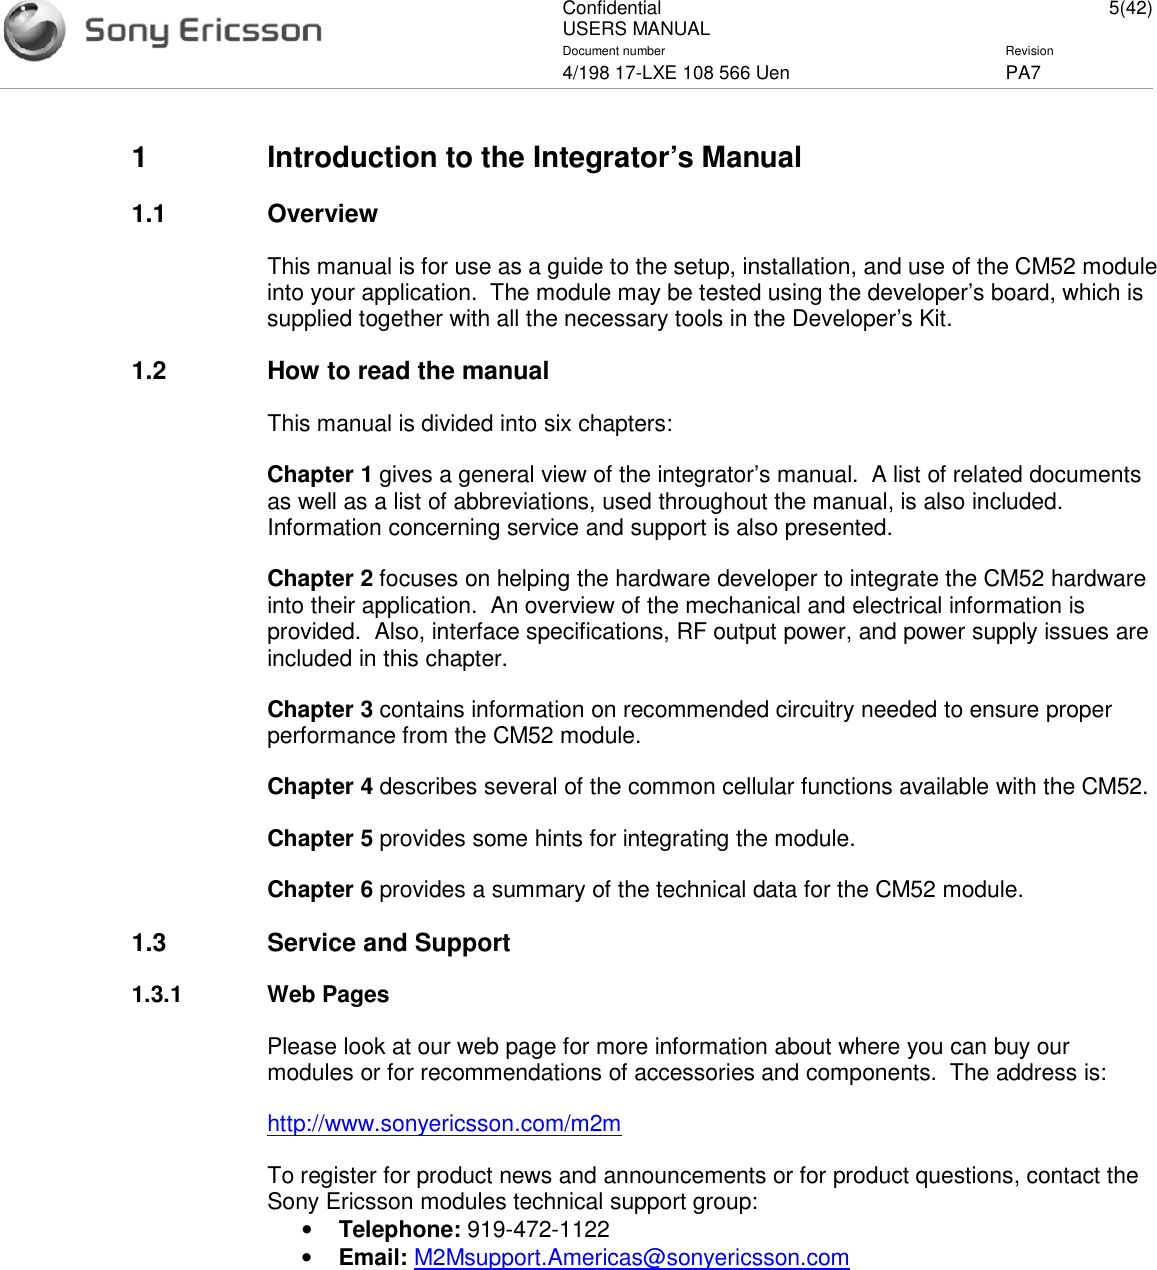 ConfidentialUSERS MANUAL 5(42)Document number Revision4/198 17-LXE 108 566 Uen PA71 Introduction to the Integrator’s Manual1.1 OverviewThis manual is for use as a guide to the setup, installation, and use of the CM52 moduleinto your application. The module may be tested using the developer’s board, which issupplied together with all the necessary tools in the Developer’s Kit.1.2 How to read the manualThis manual is divided into six chapters:Chapter 1 gives a general view of the integrator’s manual. A list of related documentsas well as a list of abbreviations, used throughout the manual, is also included.Information concerning service and support is also presented.Chapter 2 focuses on helping the hardware developer to integrate the CM52 hardwareinto their application. An overview of the mechanical and electrical information isprovided. Also, interface specifications, RF output power, and power supply issues areincluded in this chapter.Chapter 3 contains information on recommended circuitry needed to ensure properperformance from the CM52 module.Chapter 4 describes several of the common cellular functions available with the CM52.Chapter 5 provides some hints for integrating the module.Chapter 6 provides a summary of the technical data for the CM52 module.1.3 Service and Support1.3.1 Web PagesPlease look at our web page for more information about where you can buy ourmodules or for recommendations of accessories and components. The address is:http://www.sonyericsson.com/m2mTo register for product news and announcements or for product questions, contact theSony Ericsson modules technical support group:•Telephone: 919-472-1122•Email: M2Msupport.Americas@sonyericsson.com